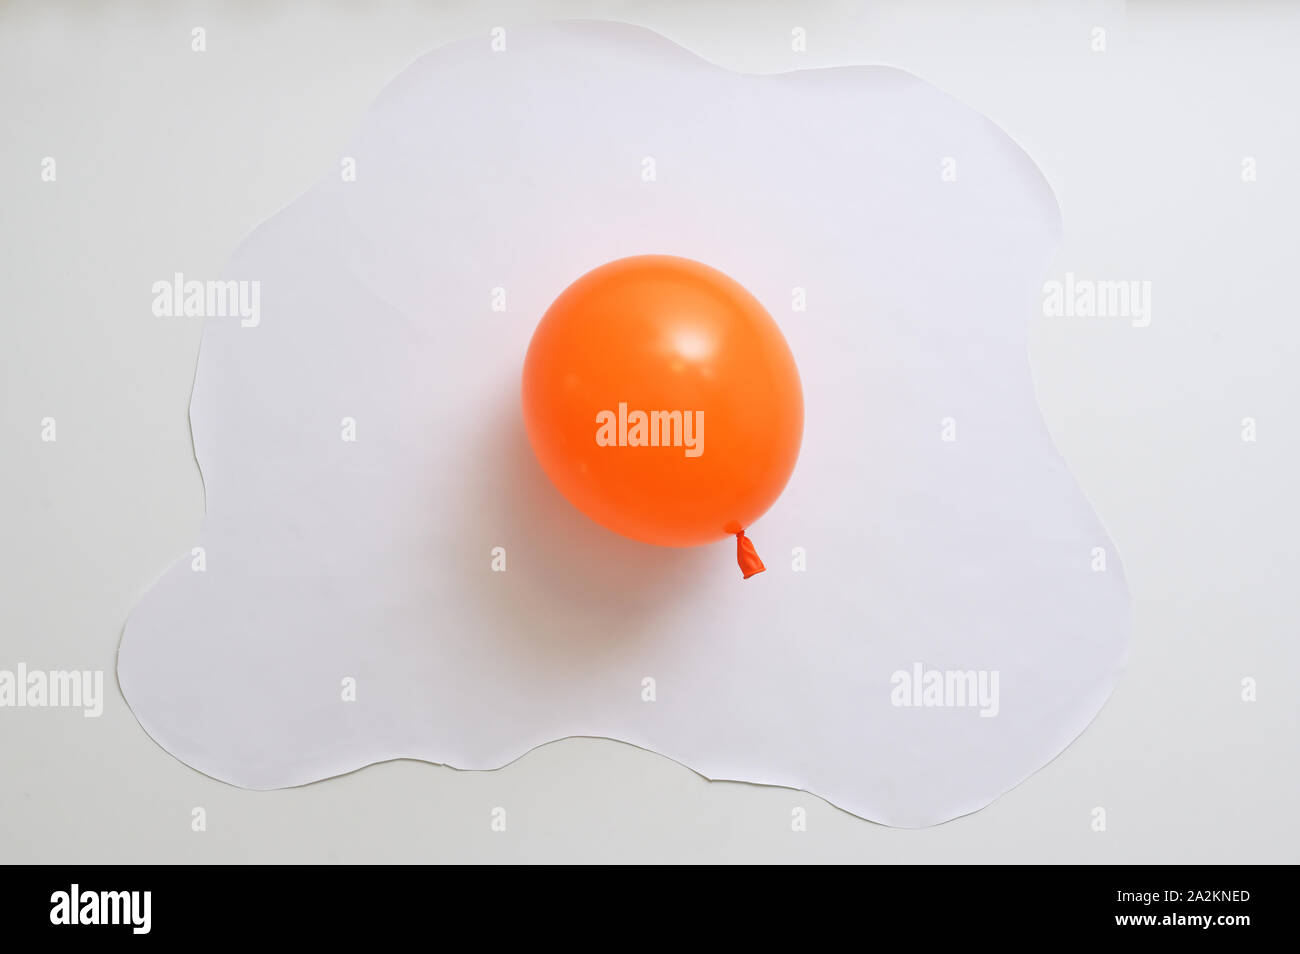 Abstract Orange Balloon With White Paper In Shape Of An Fried Egg Stock Photo